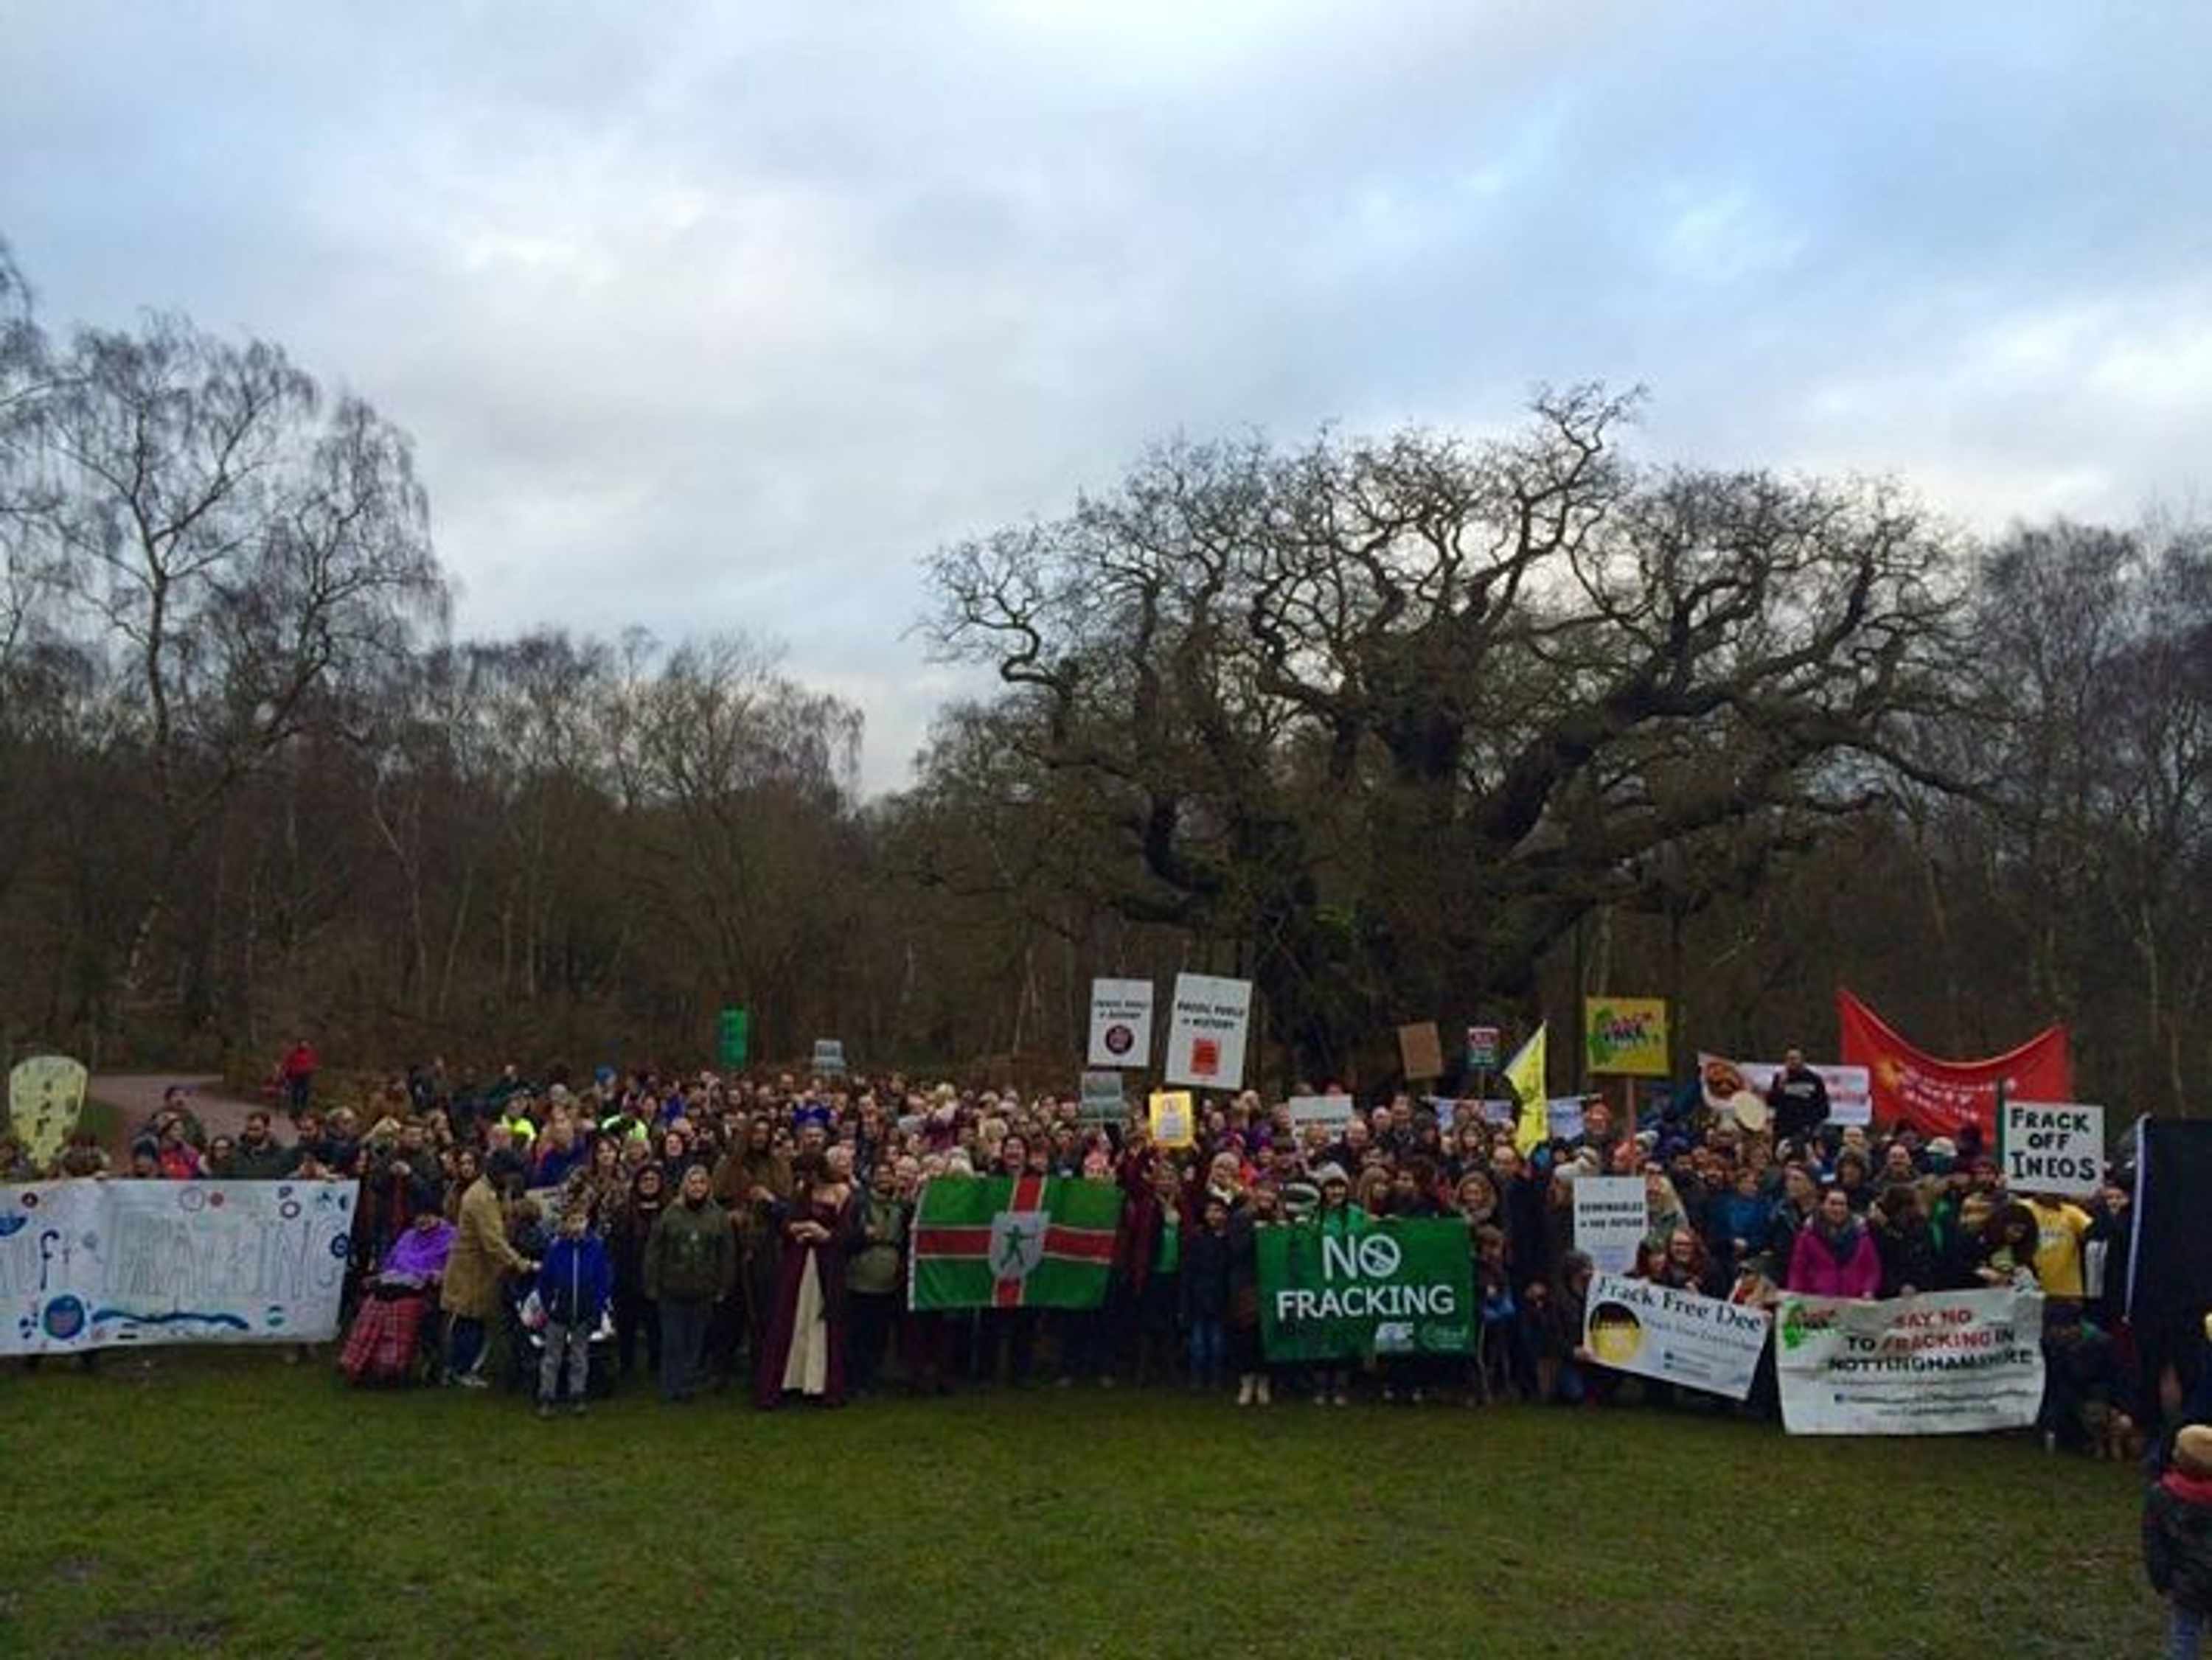 Protestors gathered at the Major Oak in Sherwood Forest